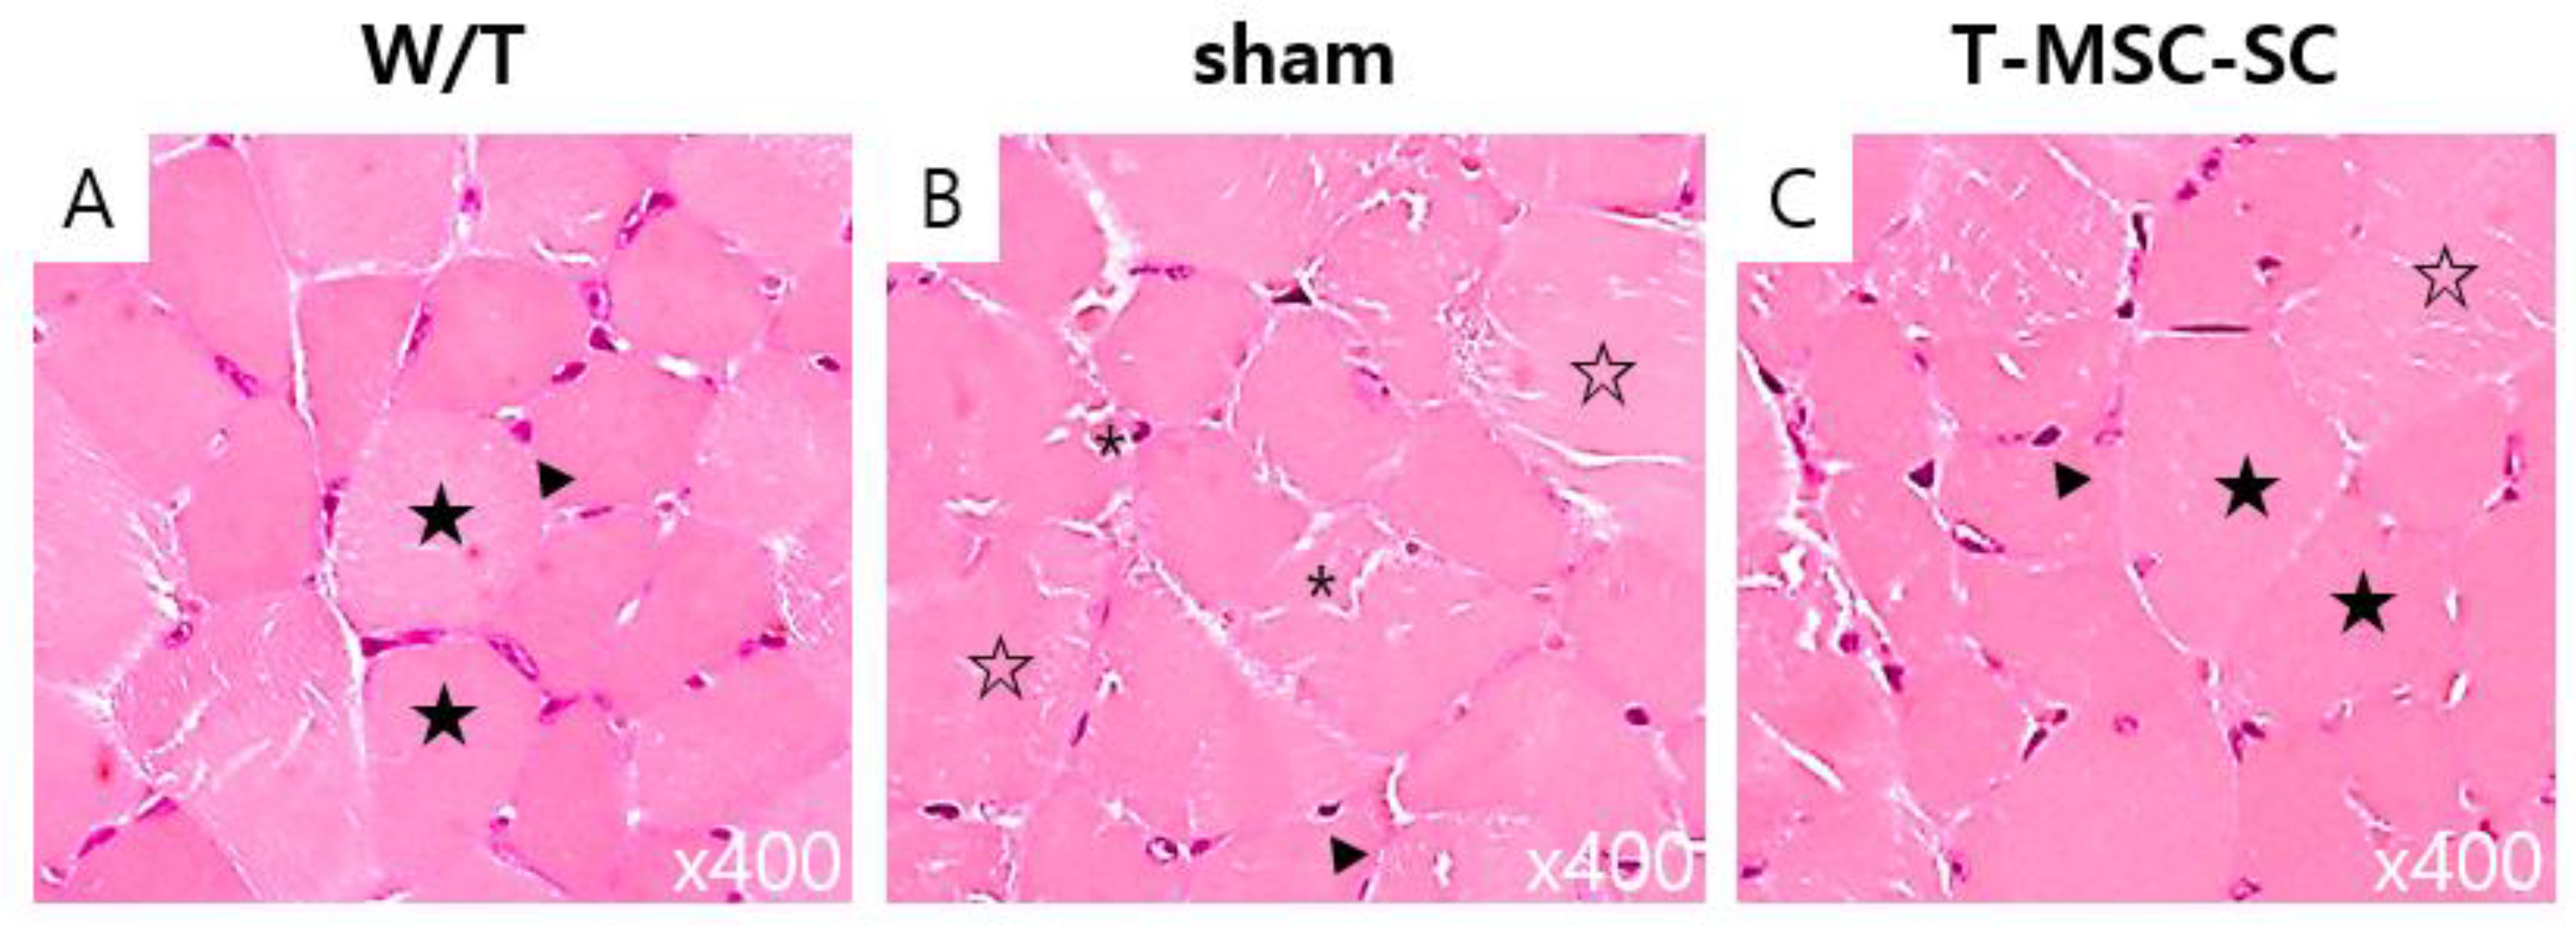 Ijms Free Full Text Differentiation Of Human Tonsil Derived Mesenchymal Stem Cells Into Schwann Like Cells Improves Neuromuscular Function In A Mouse Model Of Charcot Marie Tooth Disease Type 1a Html